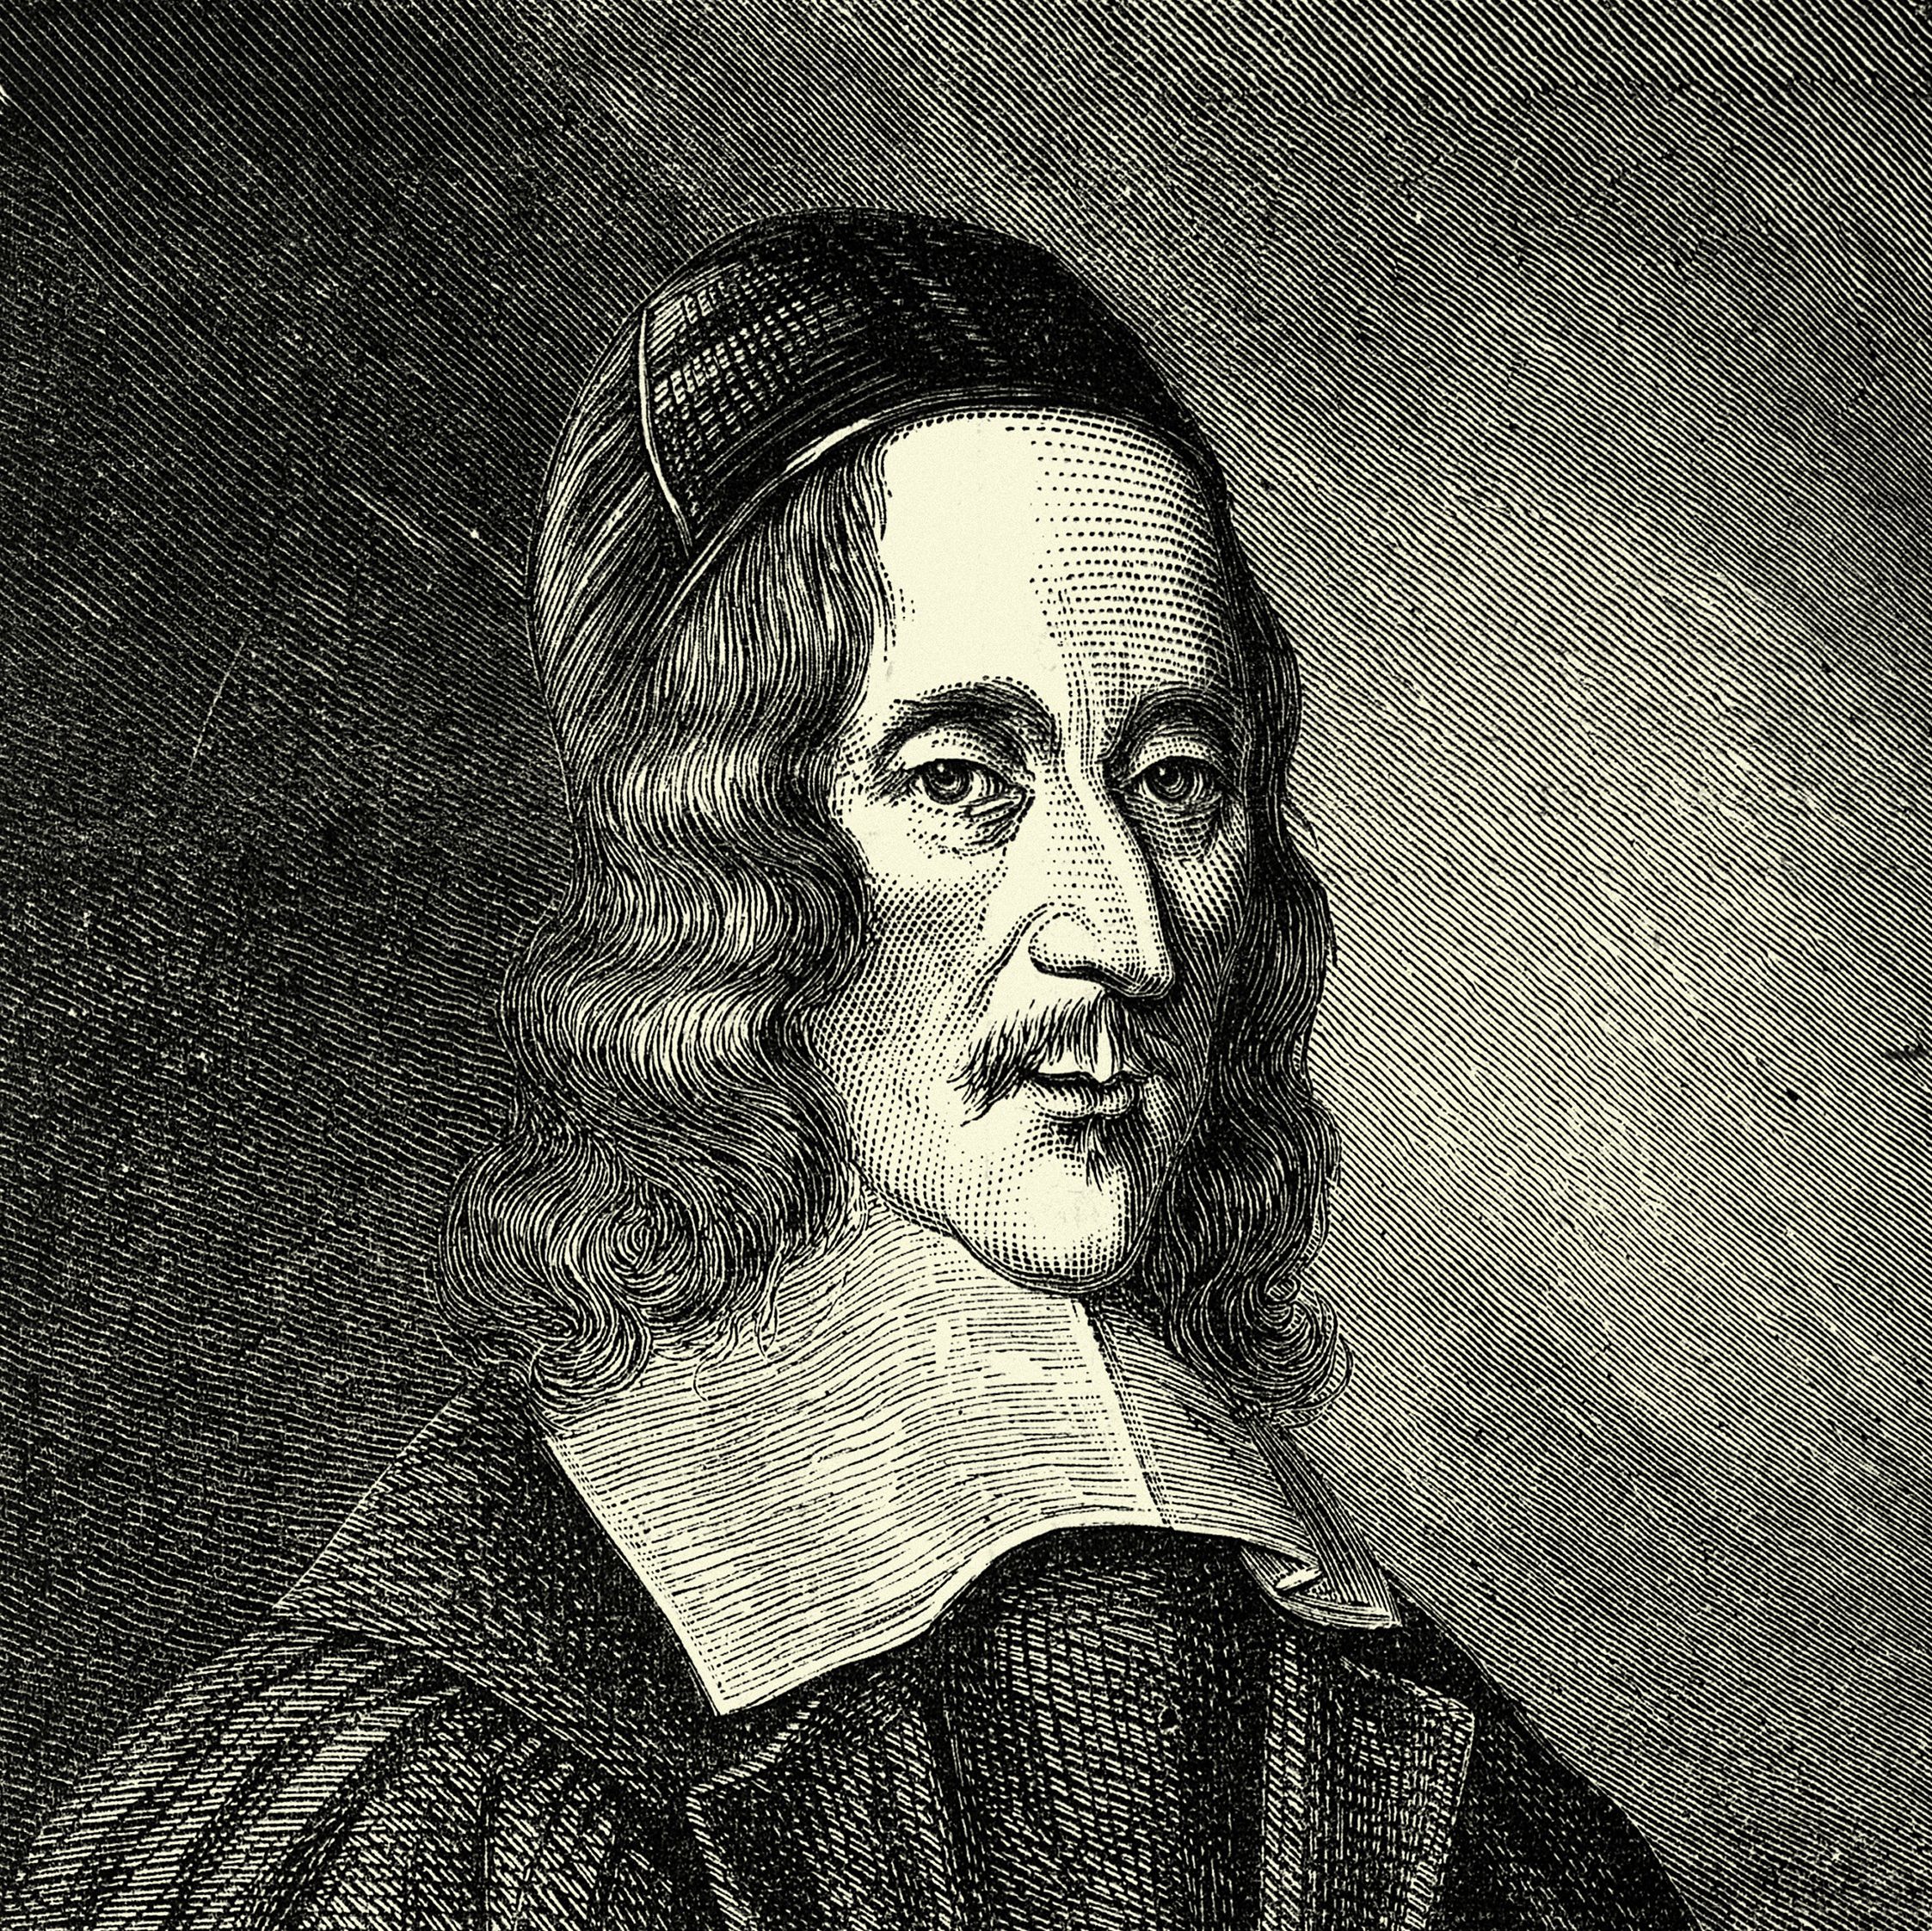 A black and white drawn portrait of George Herbert.